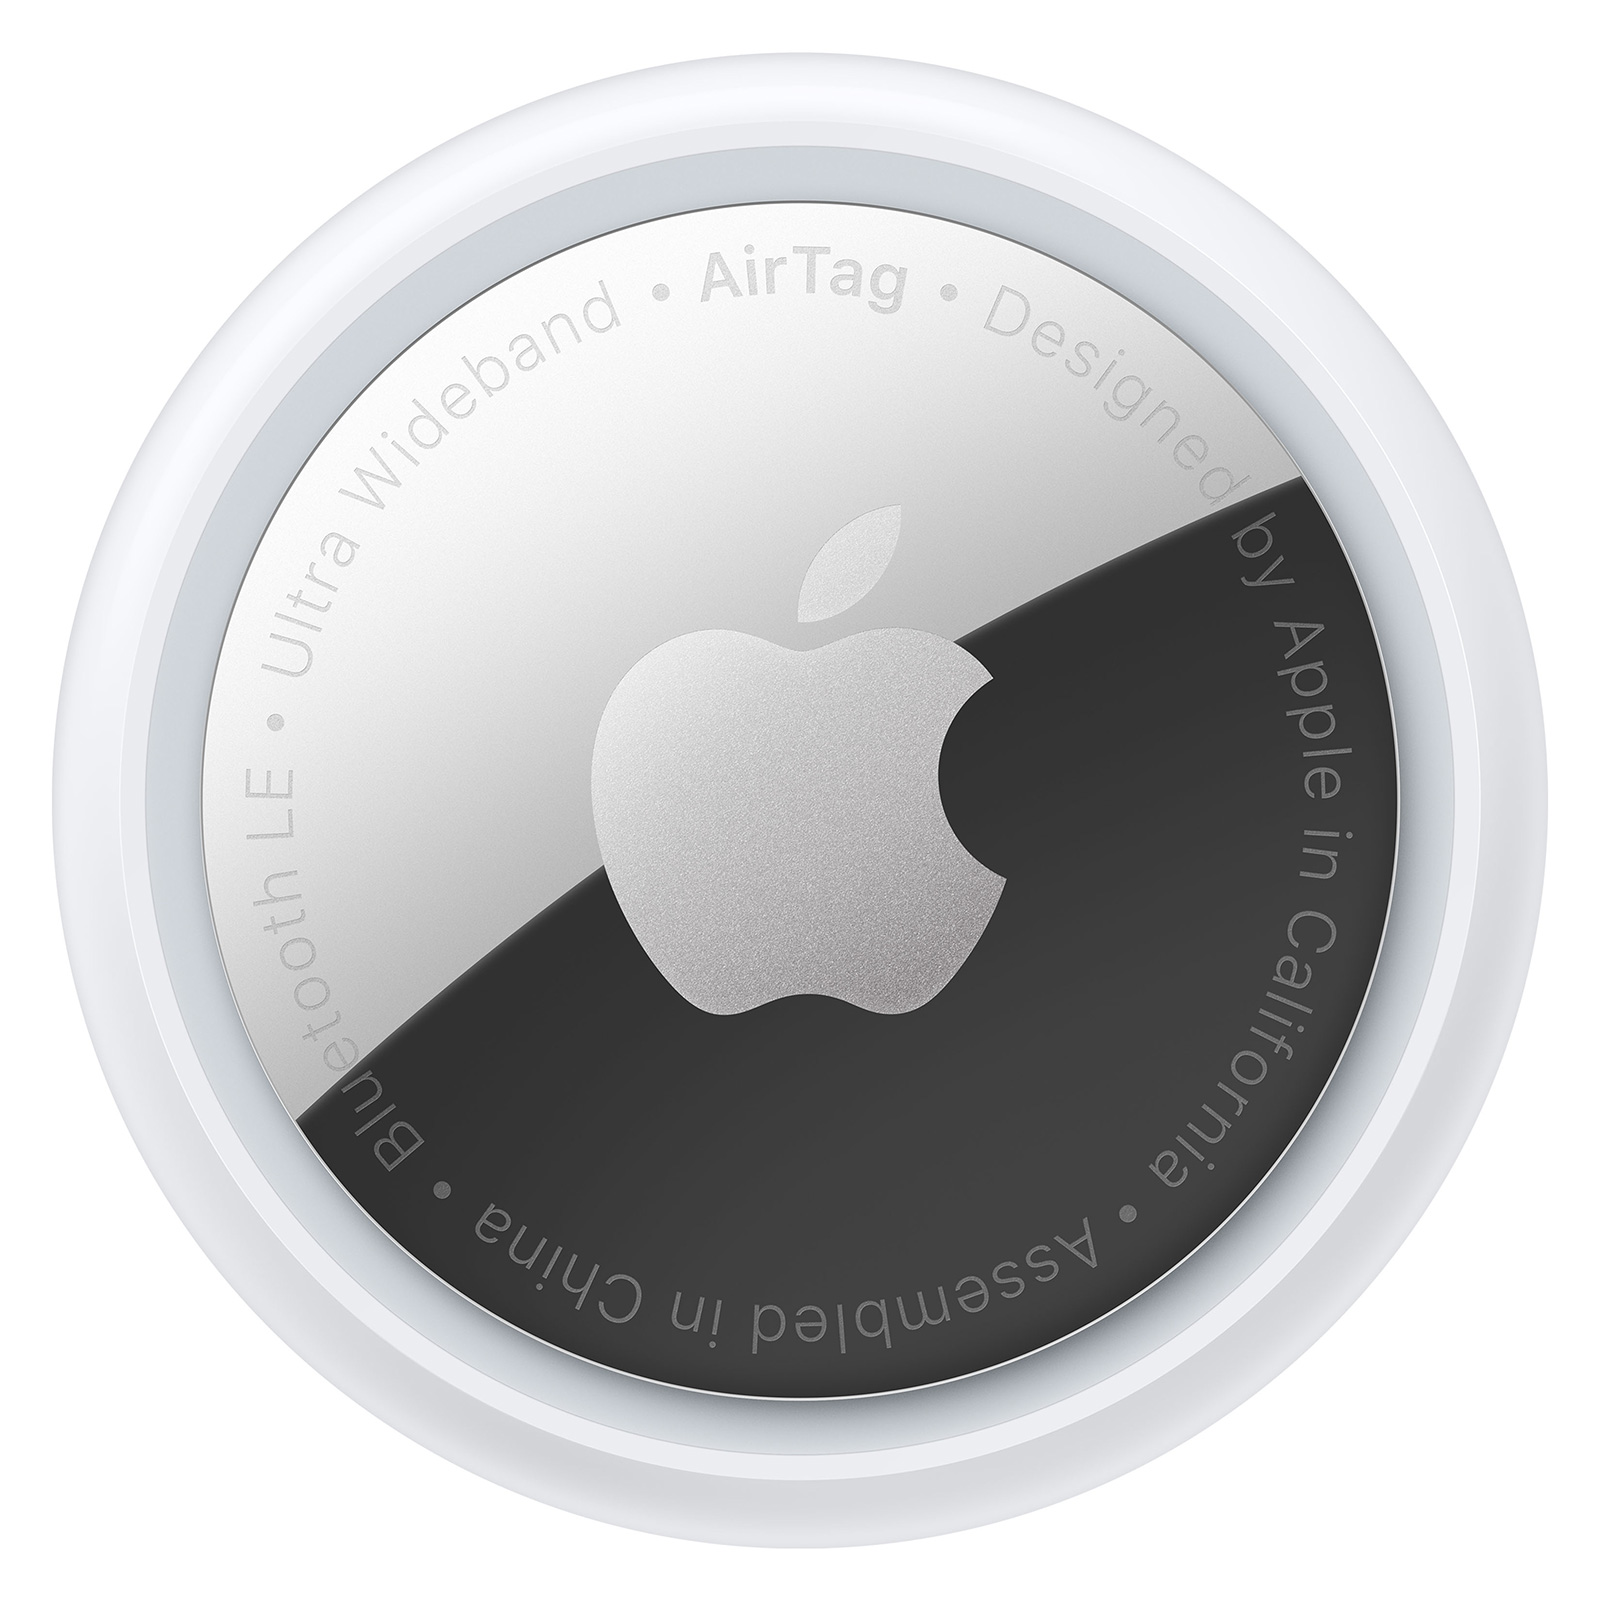 download the new for apple AntiPlagiarism NET 4.129